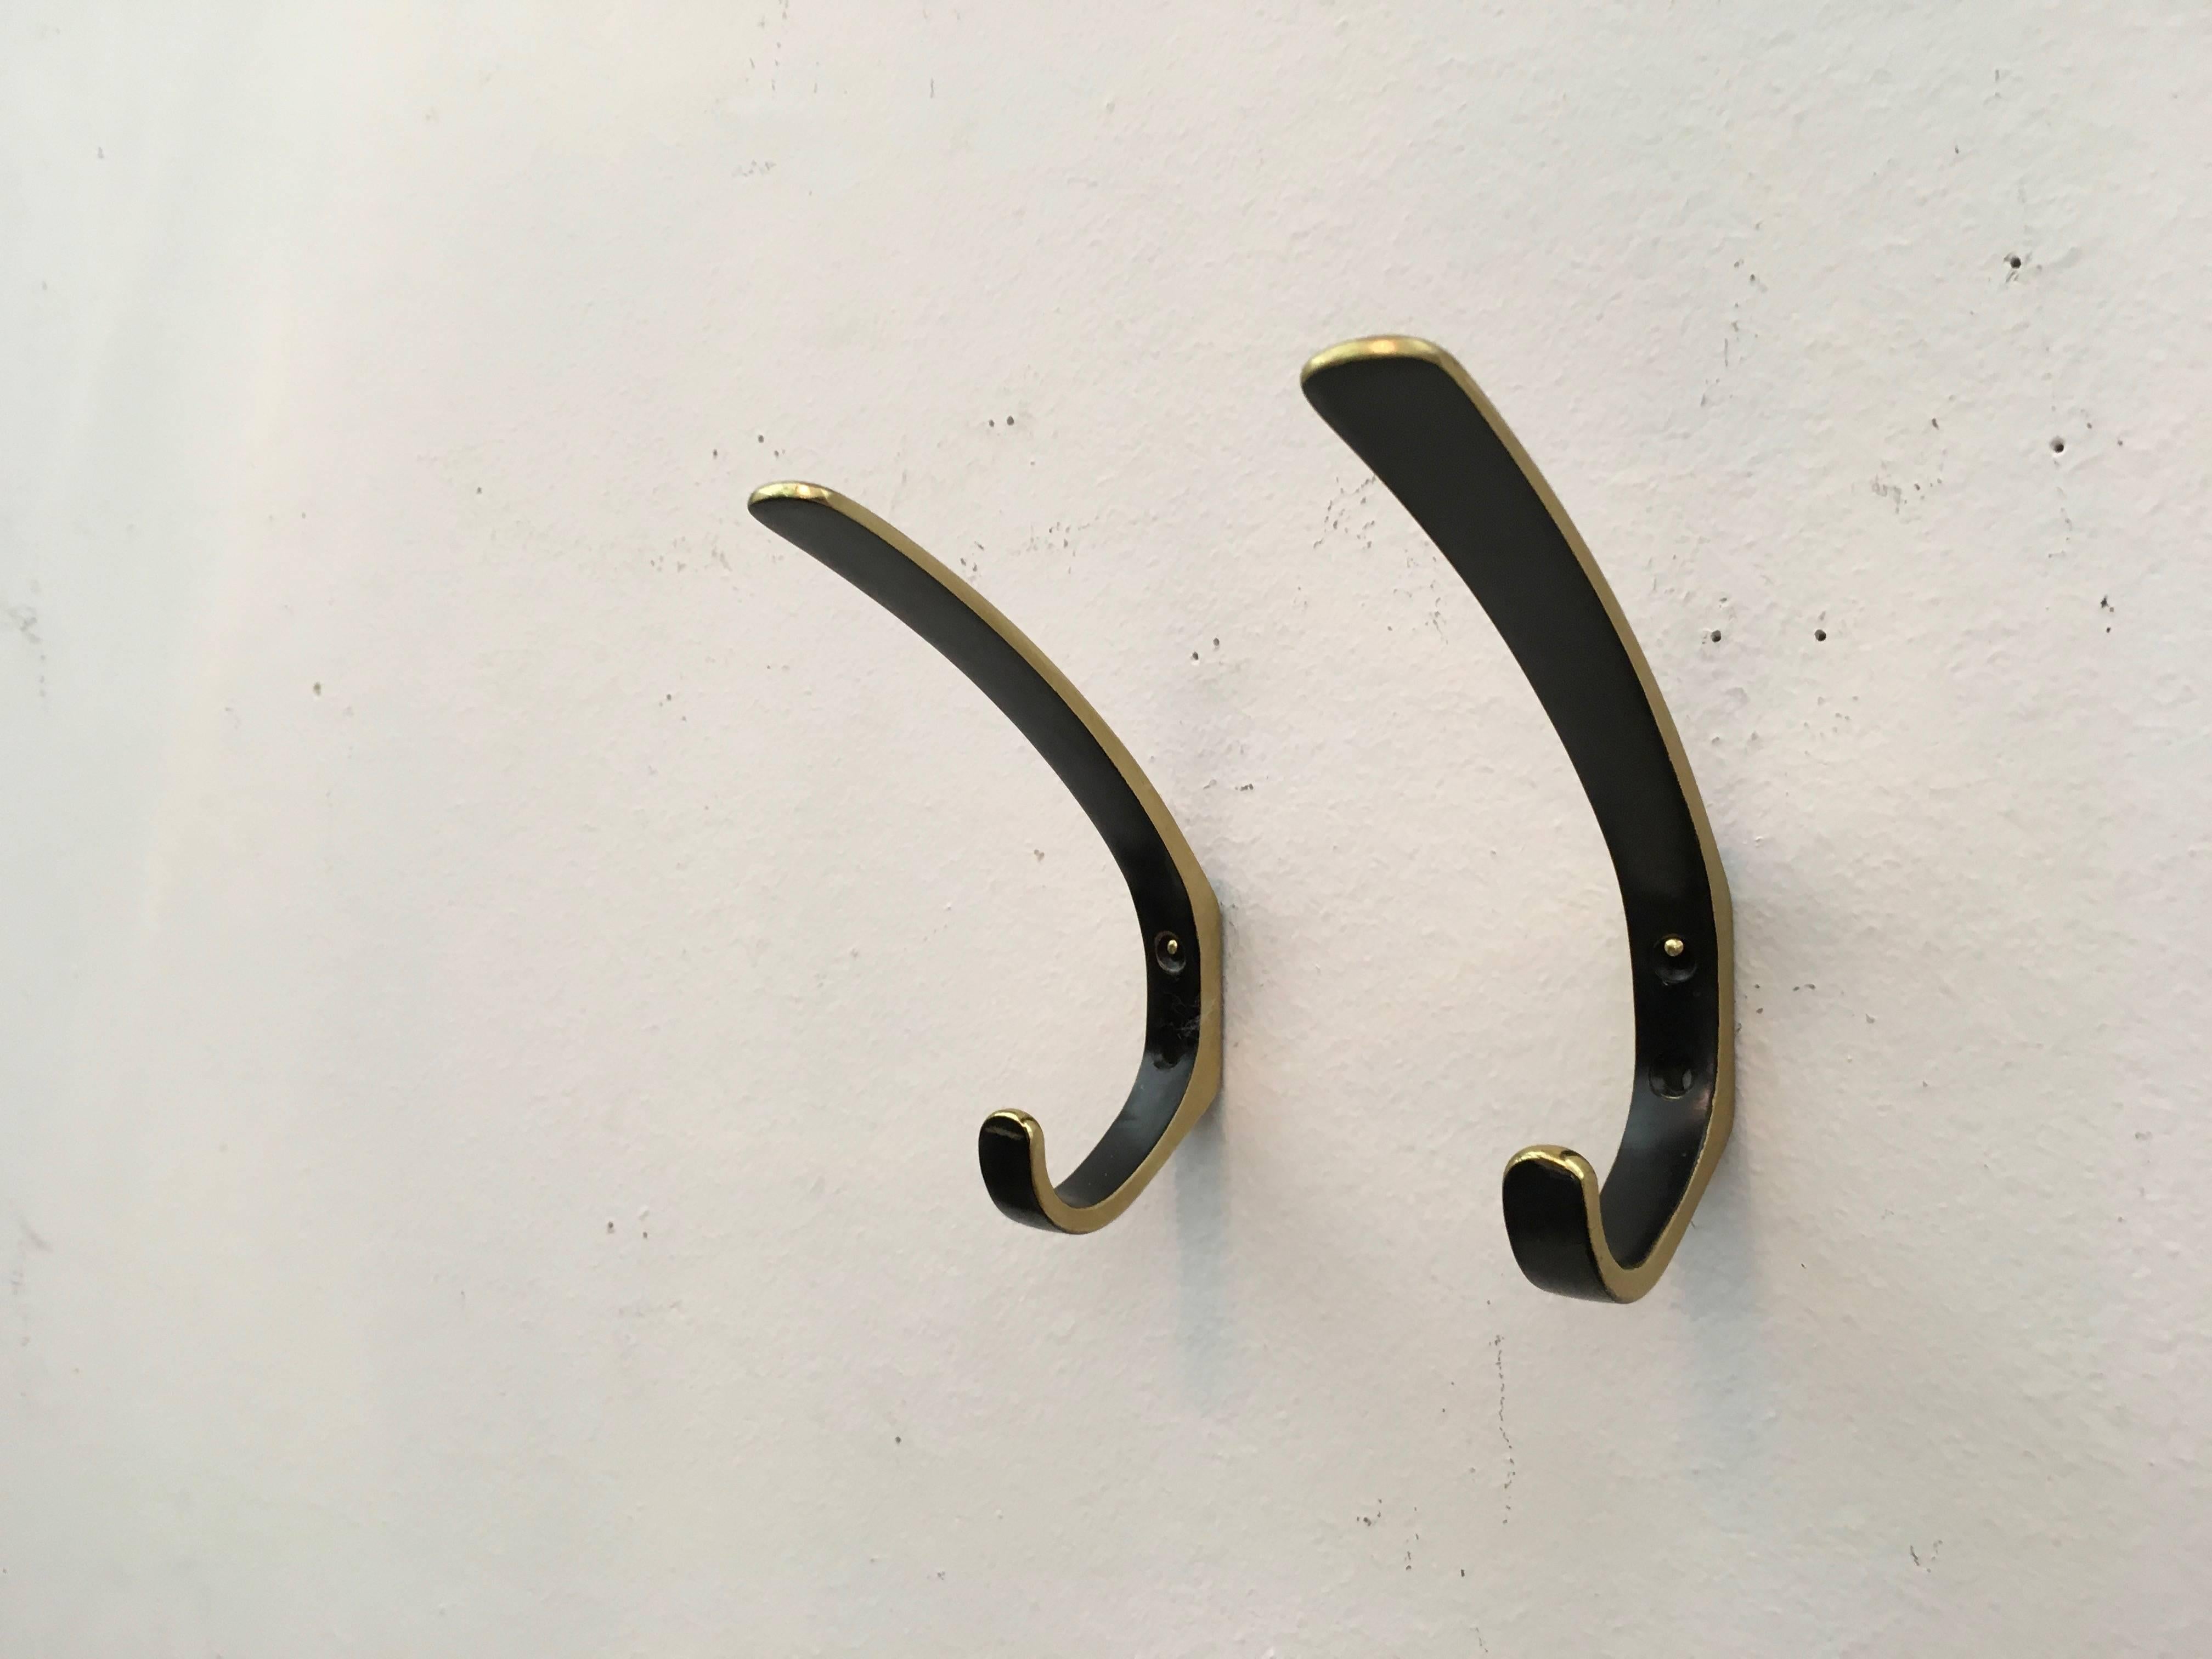 Brass Coat Wall Hooks by Hertha Baller In Excellent Condition For Sale In Vienna, AT